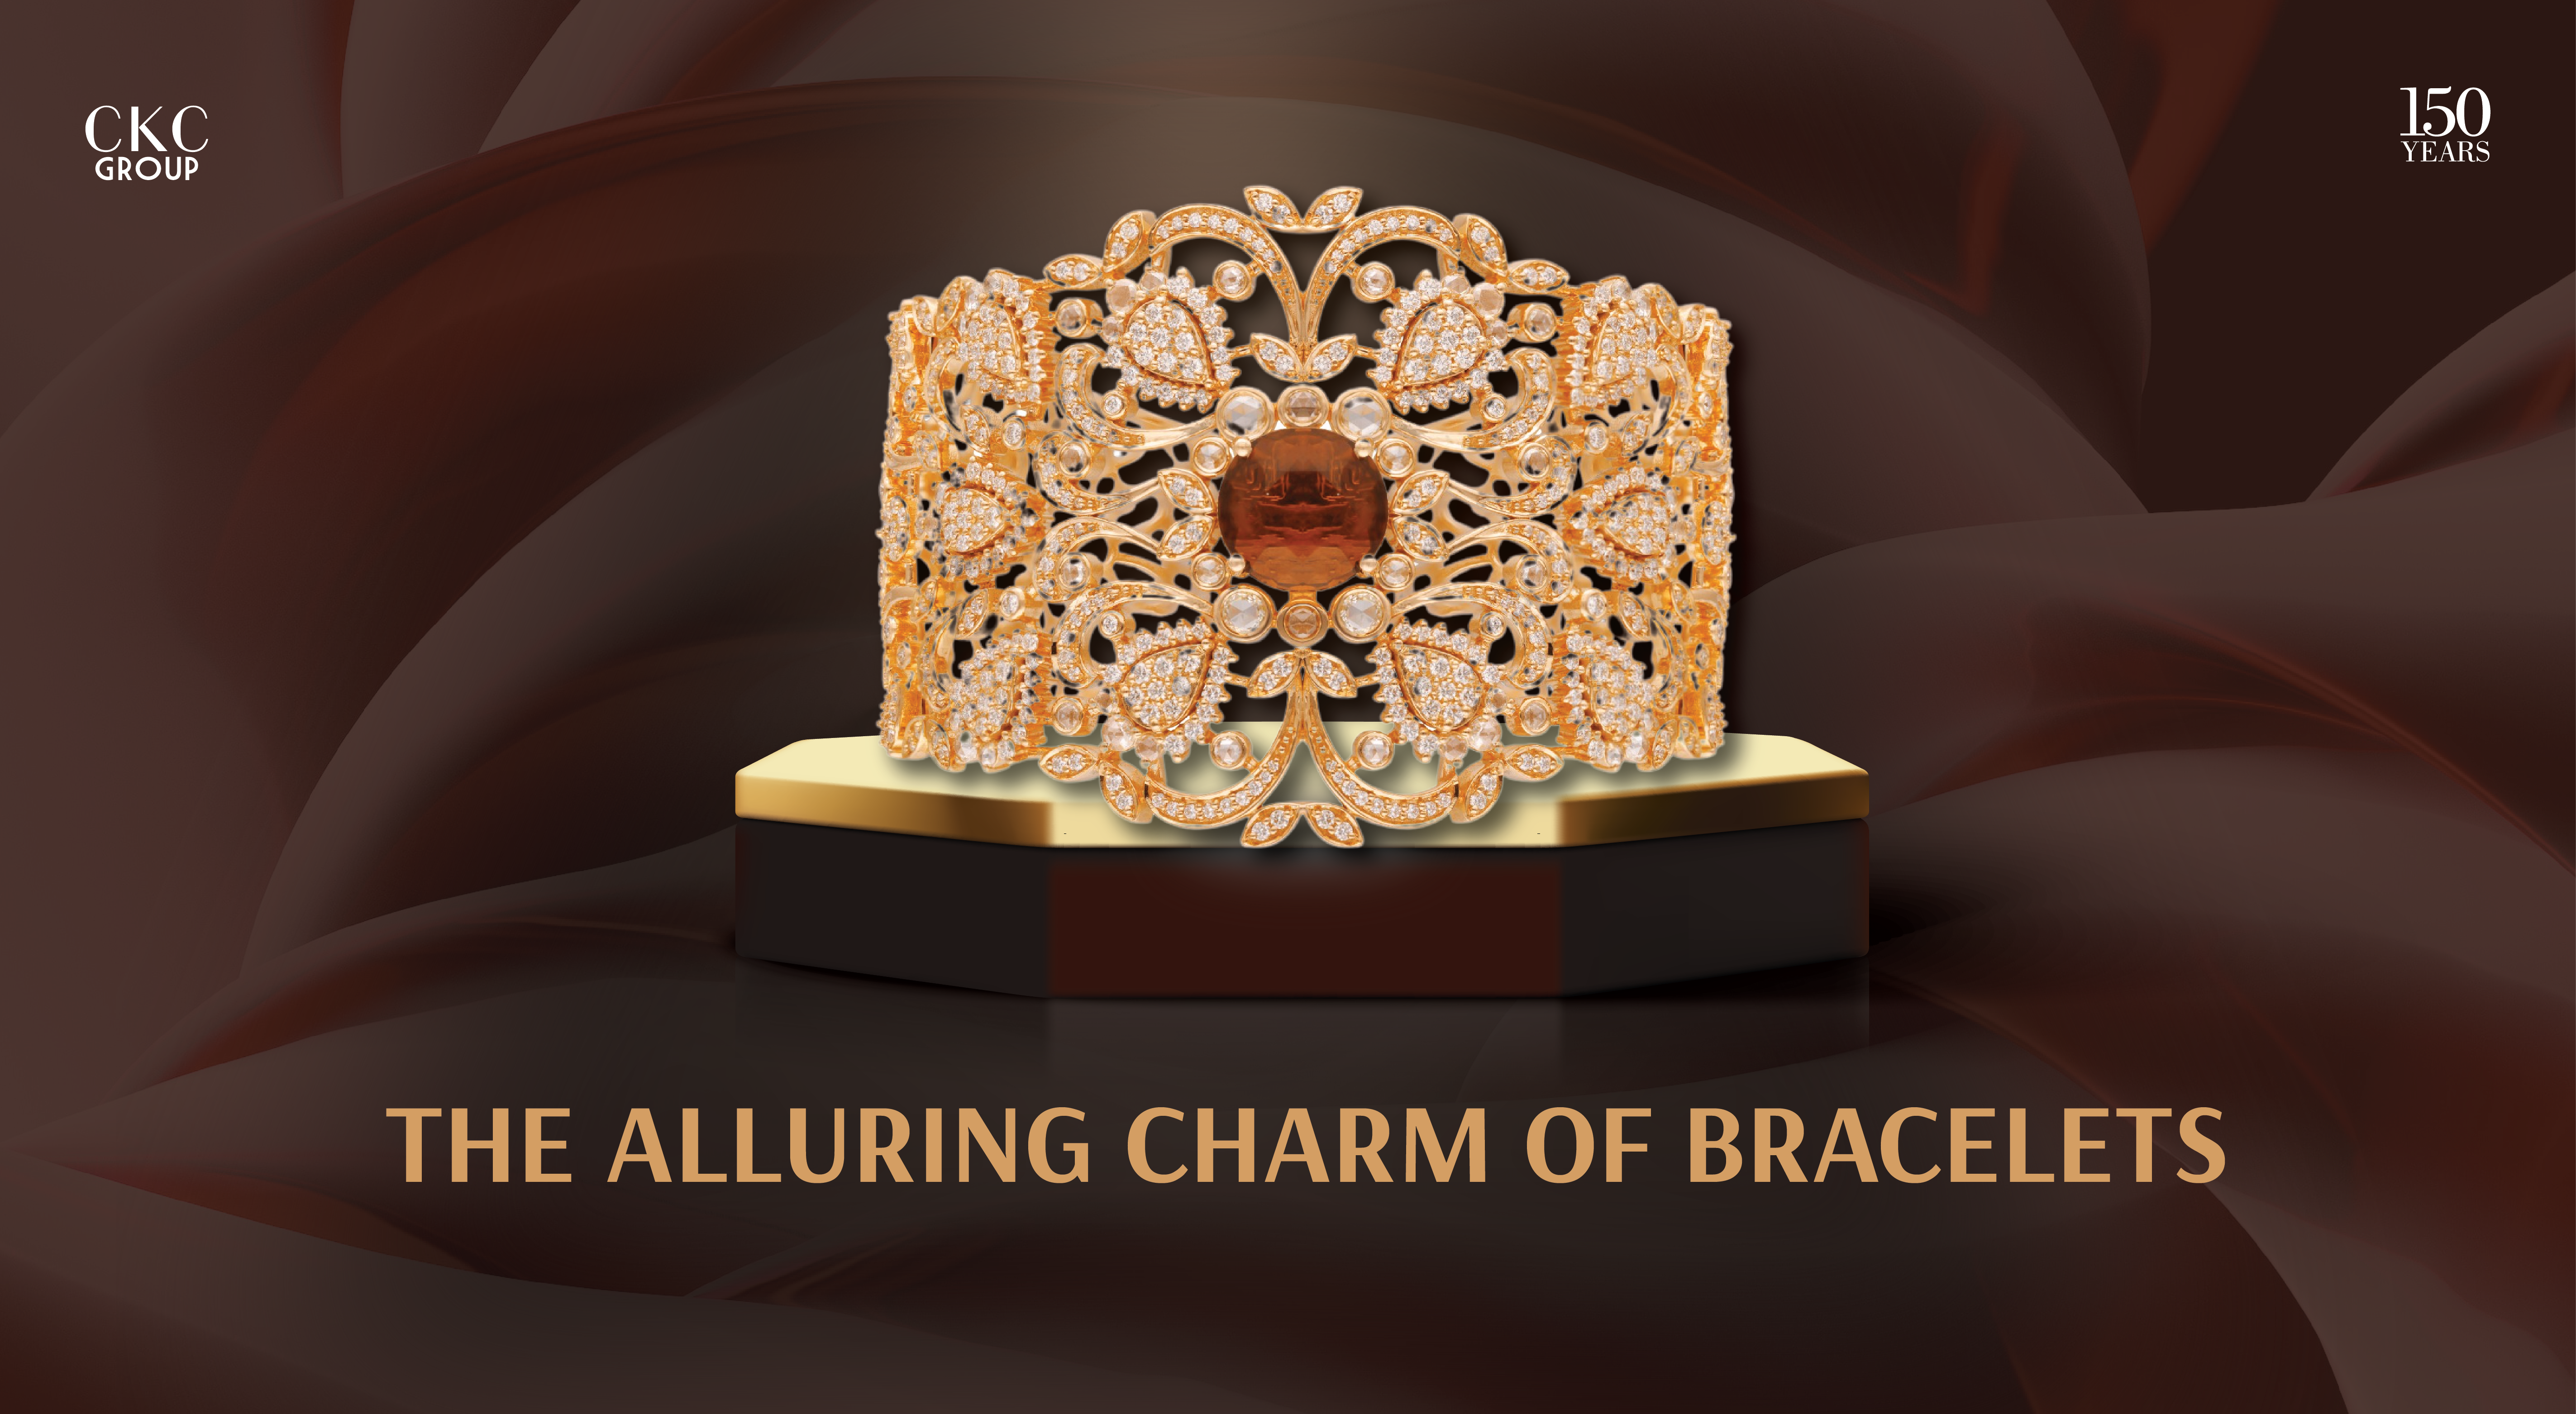 The Alluring Charm of Bracelets